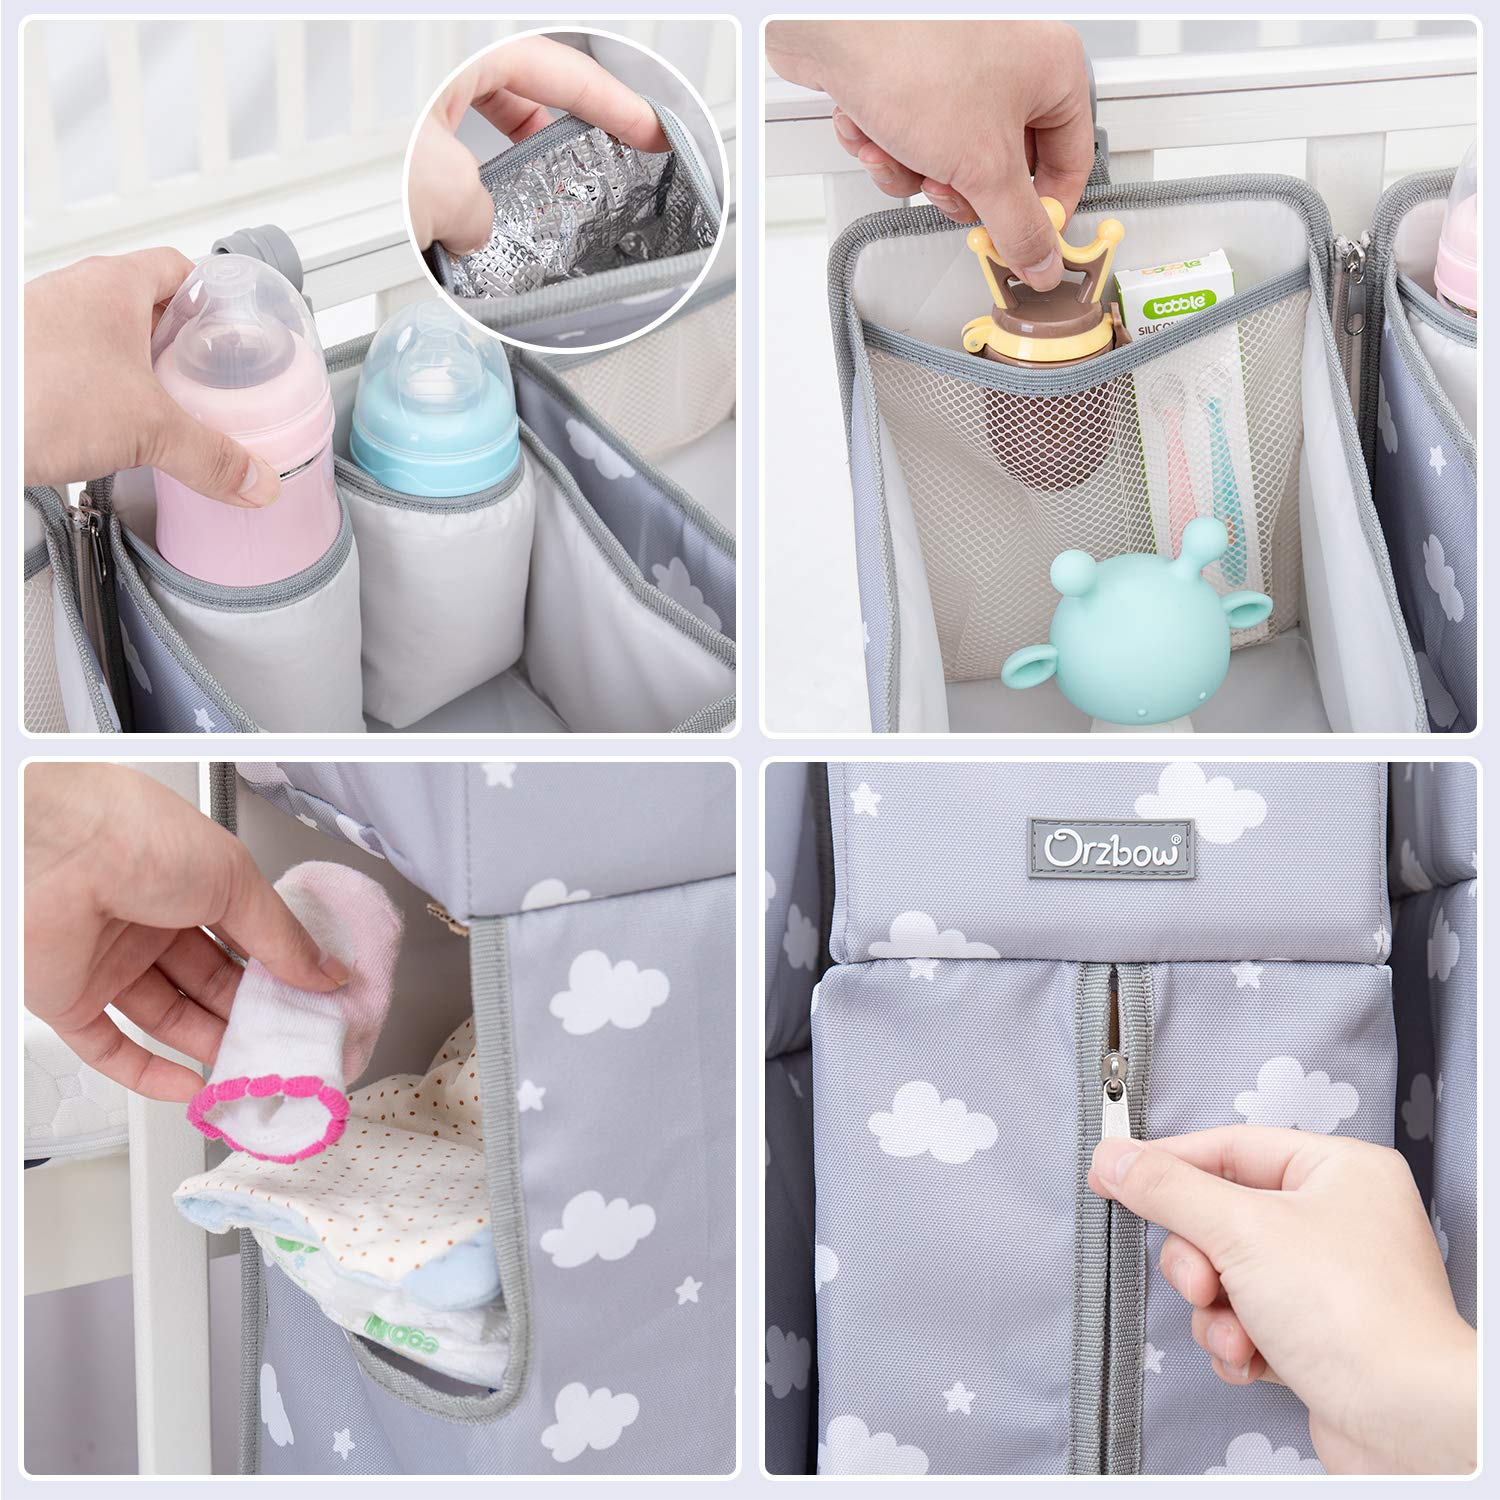 Orzbow 3-in-1 Hanging Diaper Organization Storage for Baby Essentials | Nursery Organizer and Baby Diaper Caddy | Hang on Crib, Changing Table or Wall, Gray